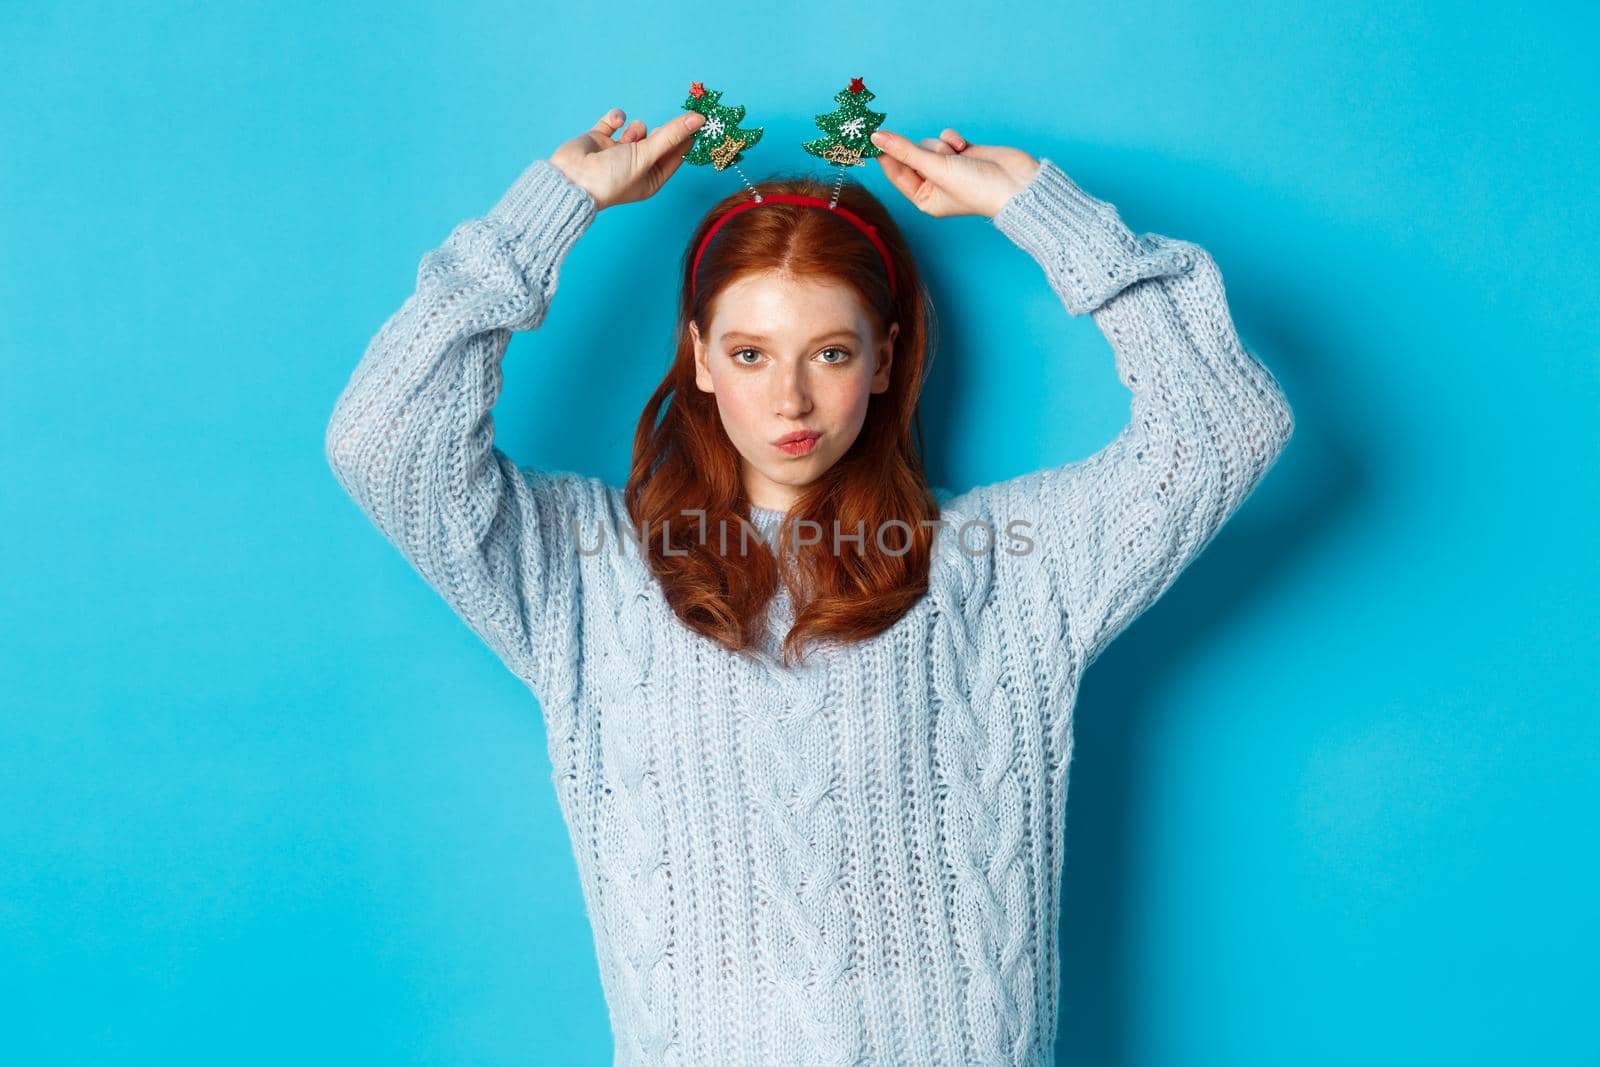 Winter holidays and Christmas sales concept. Beautiful redhead female model celebrating New Year, wearing funny party headband and sweater, smiling at camera.